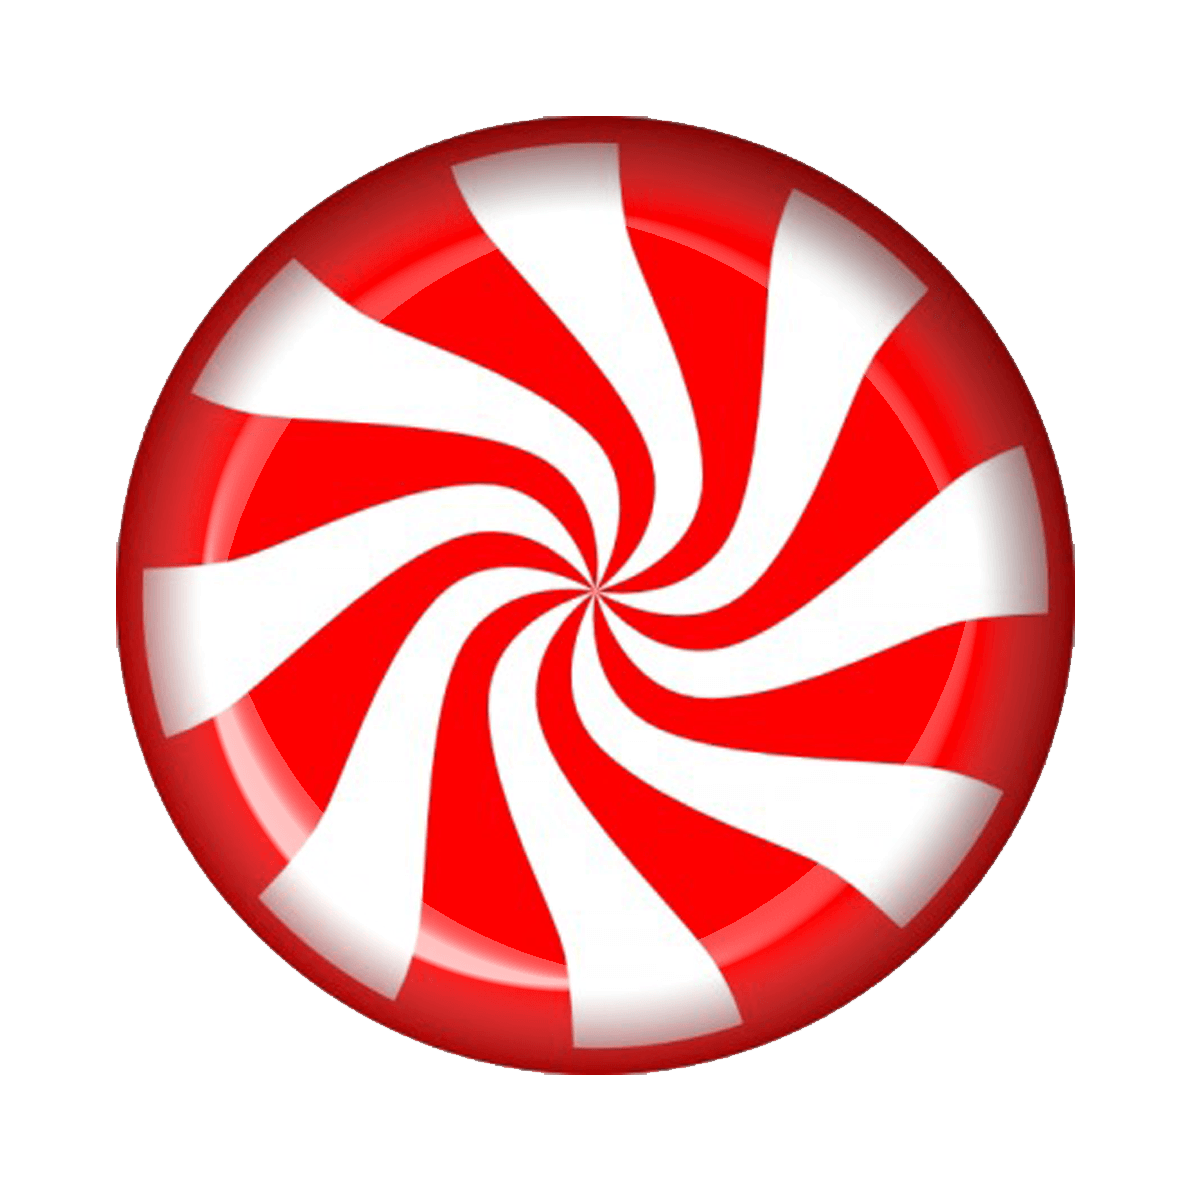 peppermint images free download